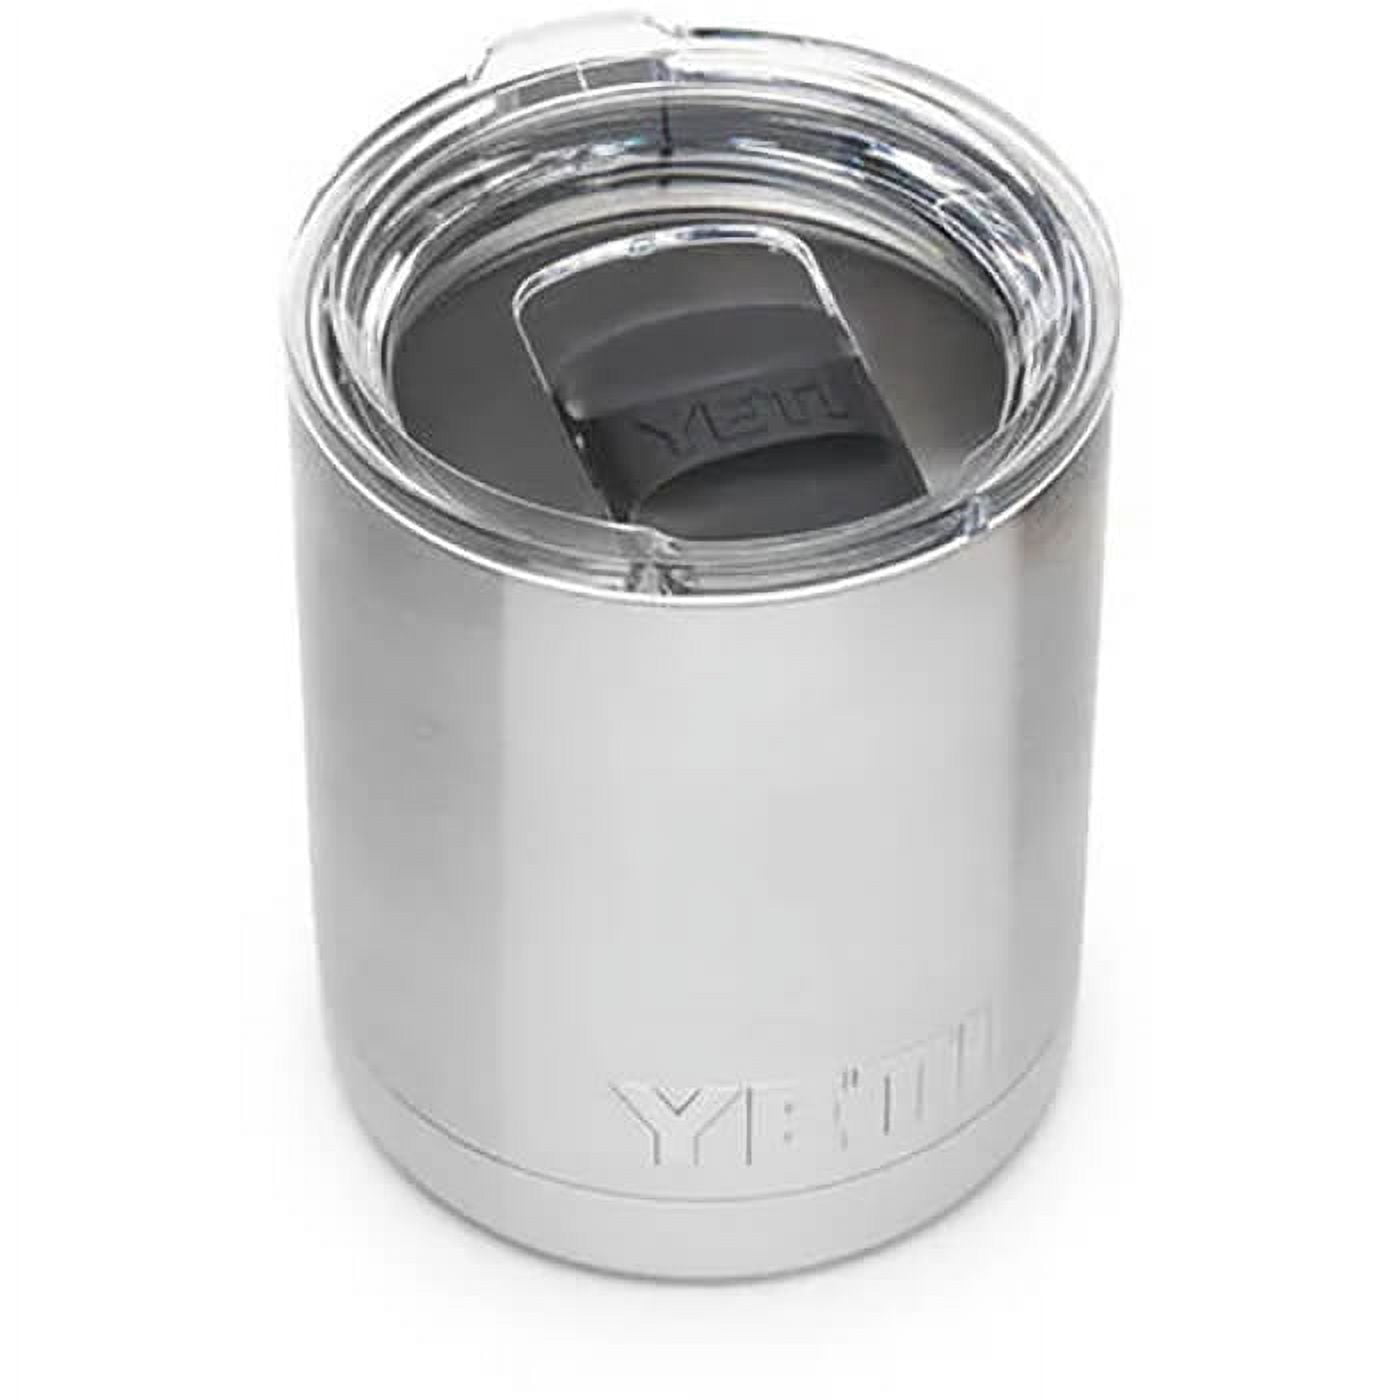 Come and Steak It® YETI 10 Oz. Rambler Stackable Lowball Cup with Magslider  Lid